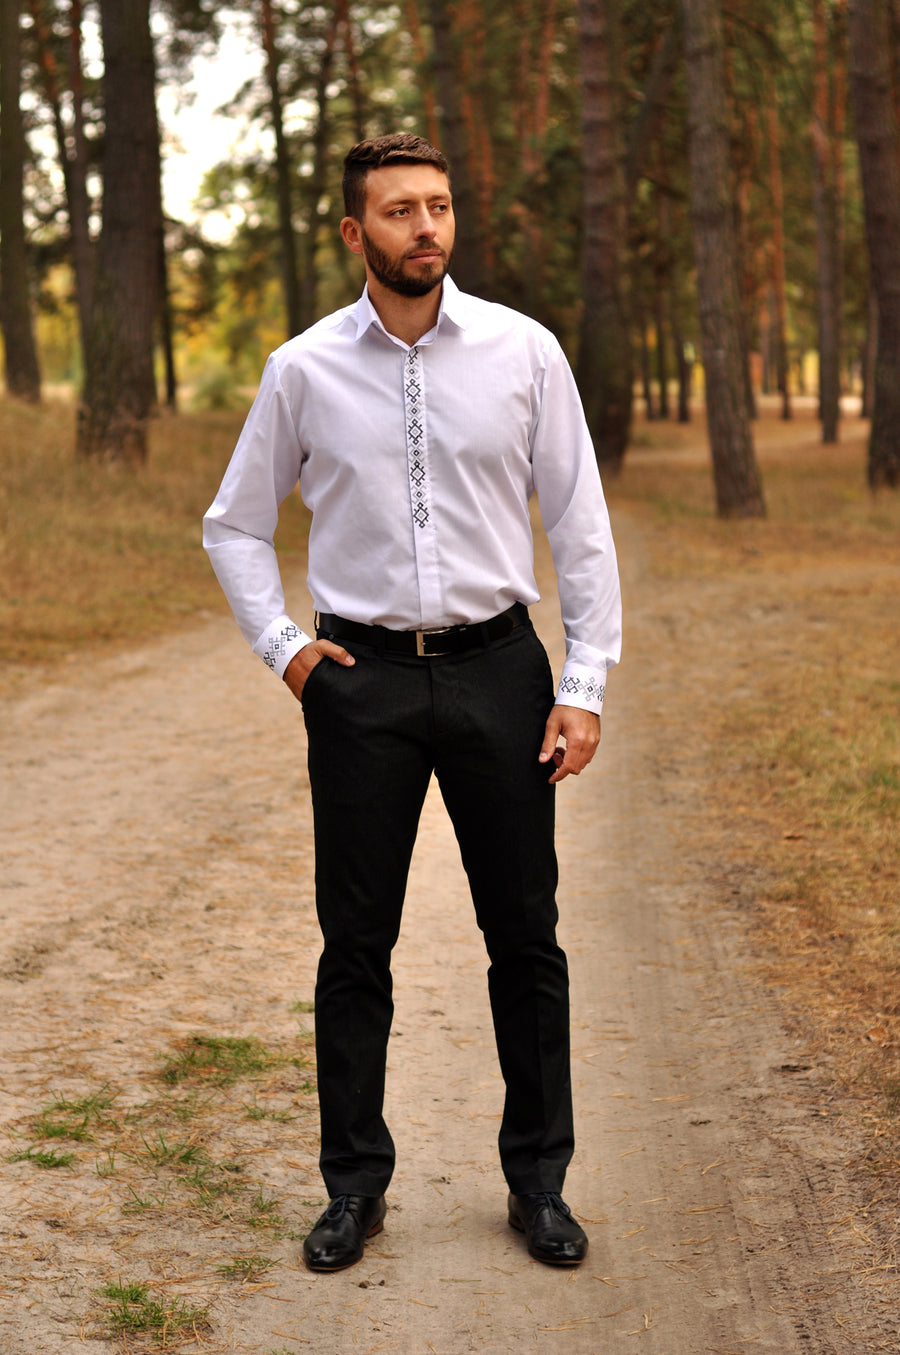 Classic embroidered wedding white shirt for an elegant man